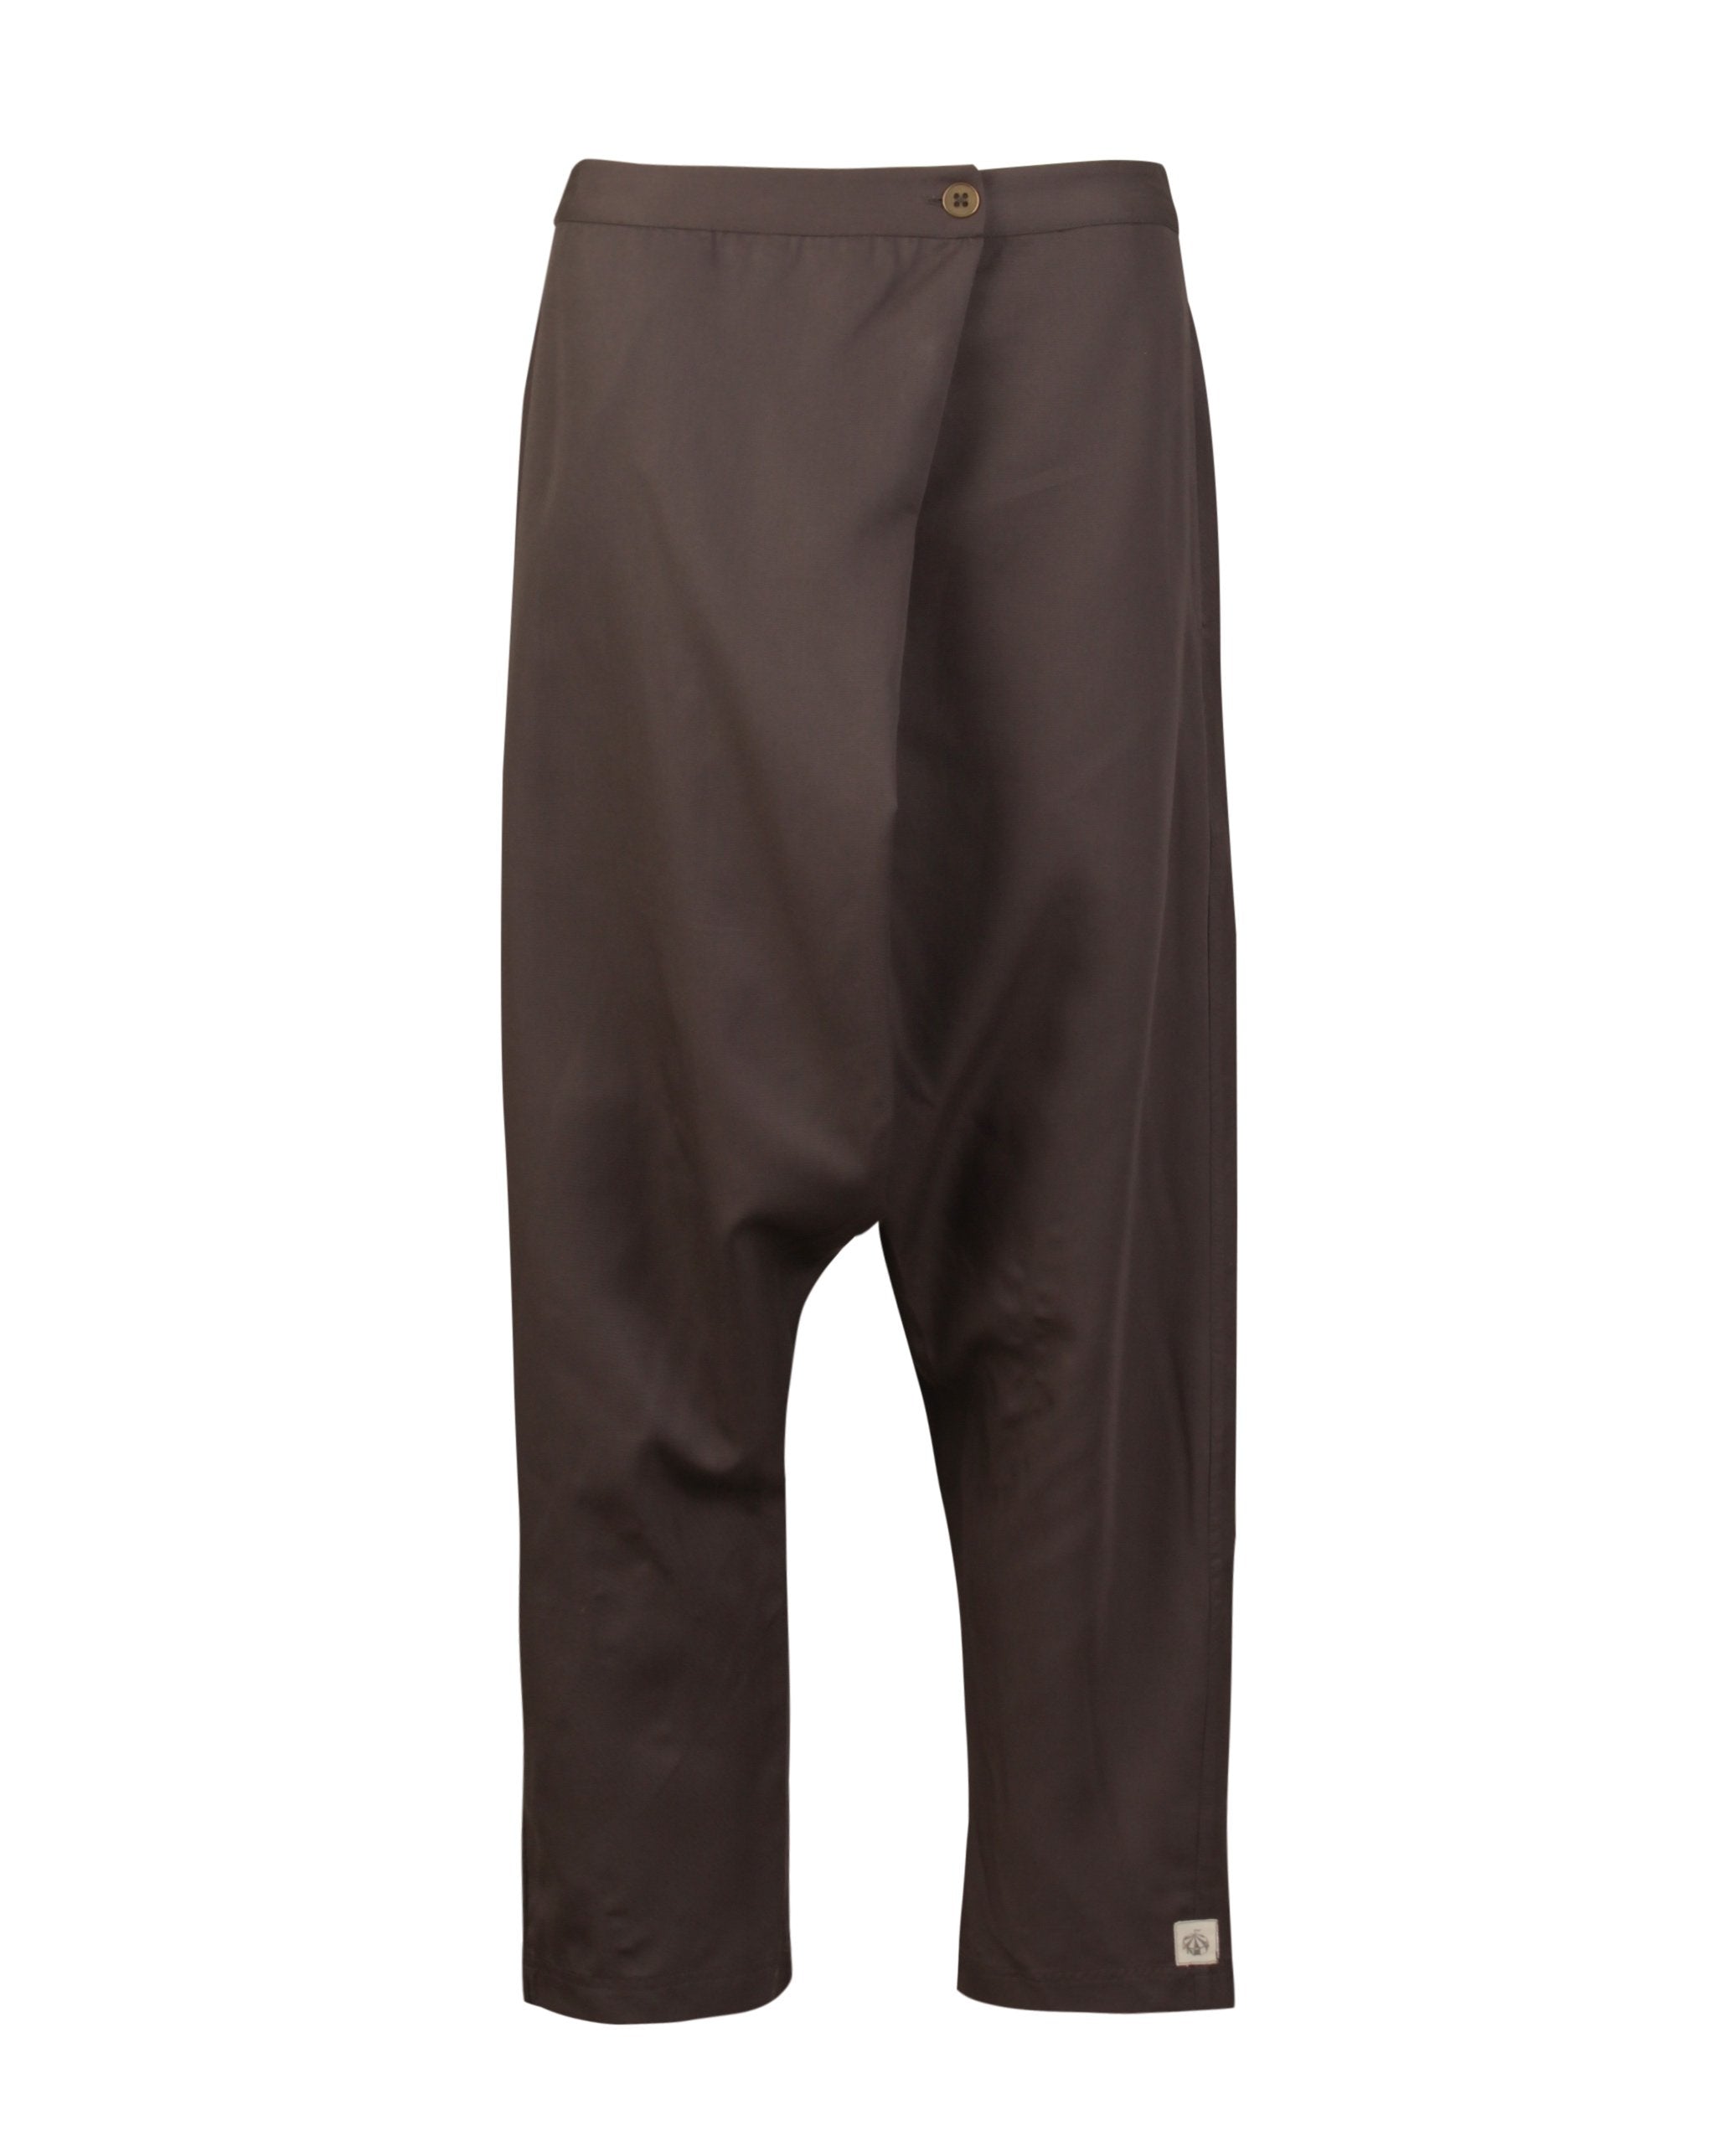 Slouchy Pants - Charcoal